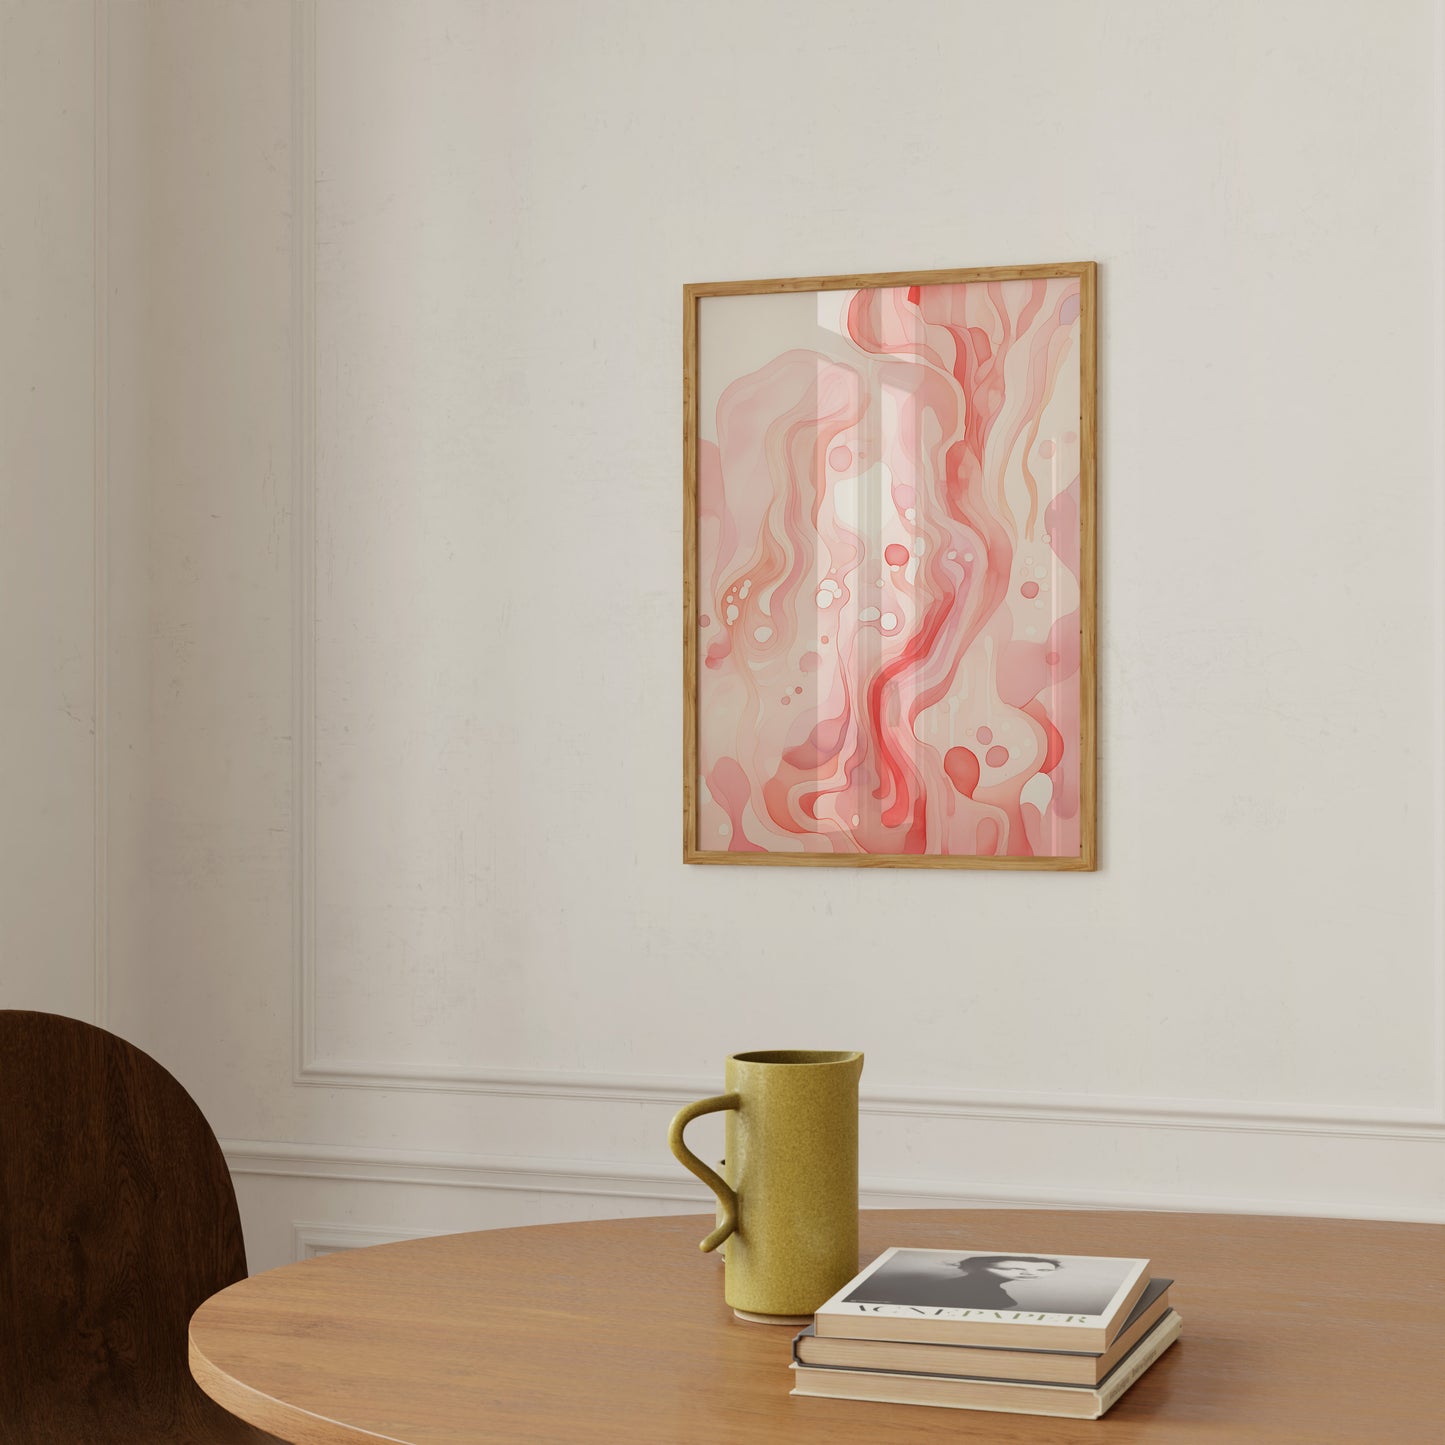 A framed abstract artwork on a wall above a table with a mug and books.